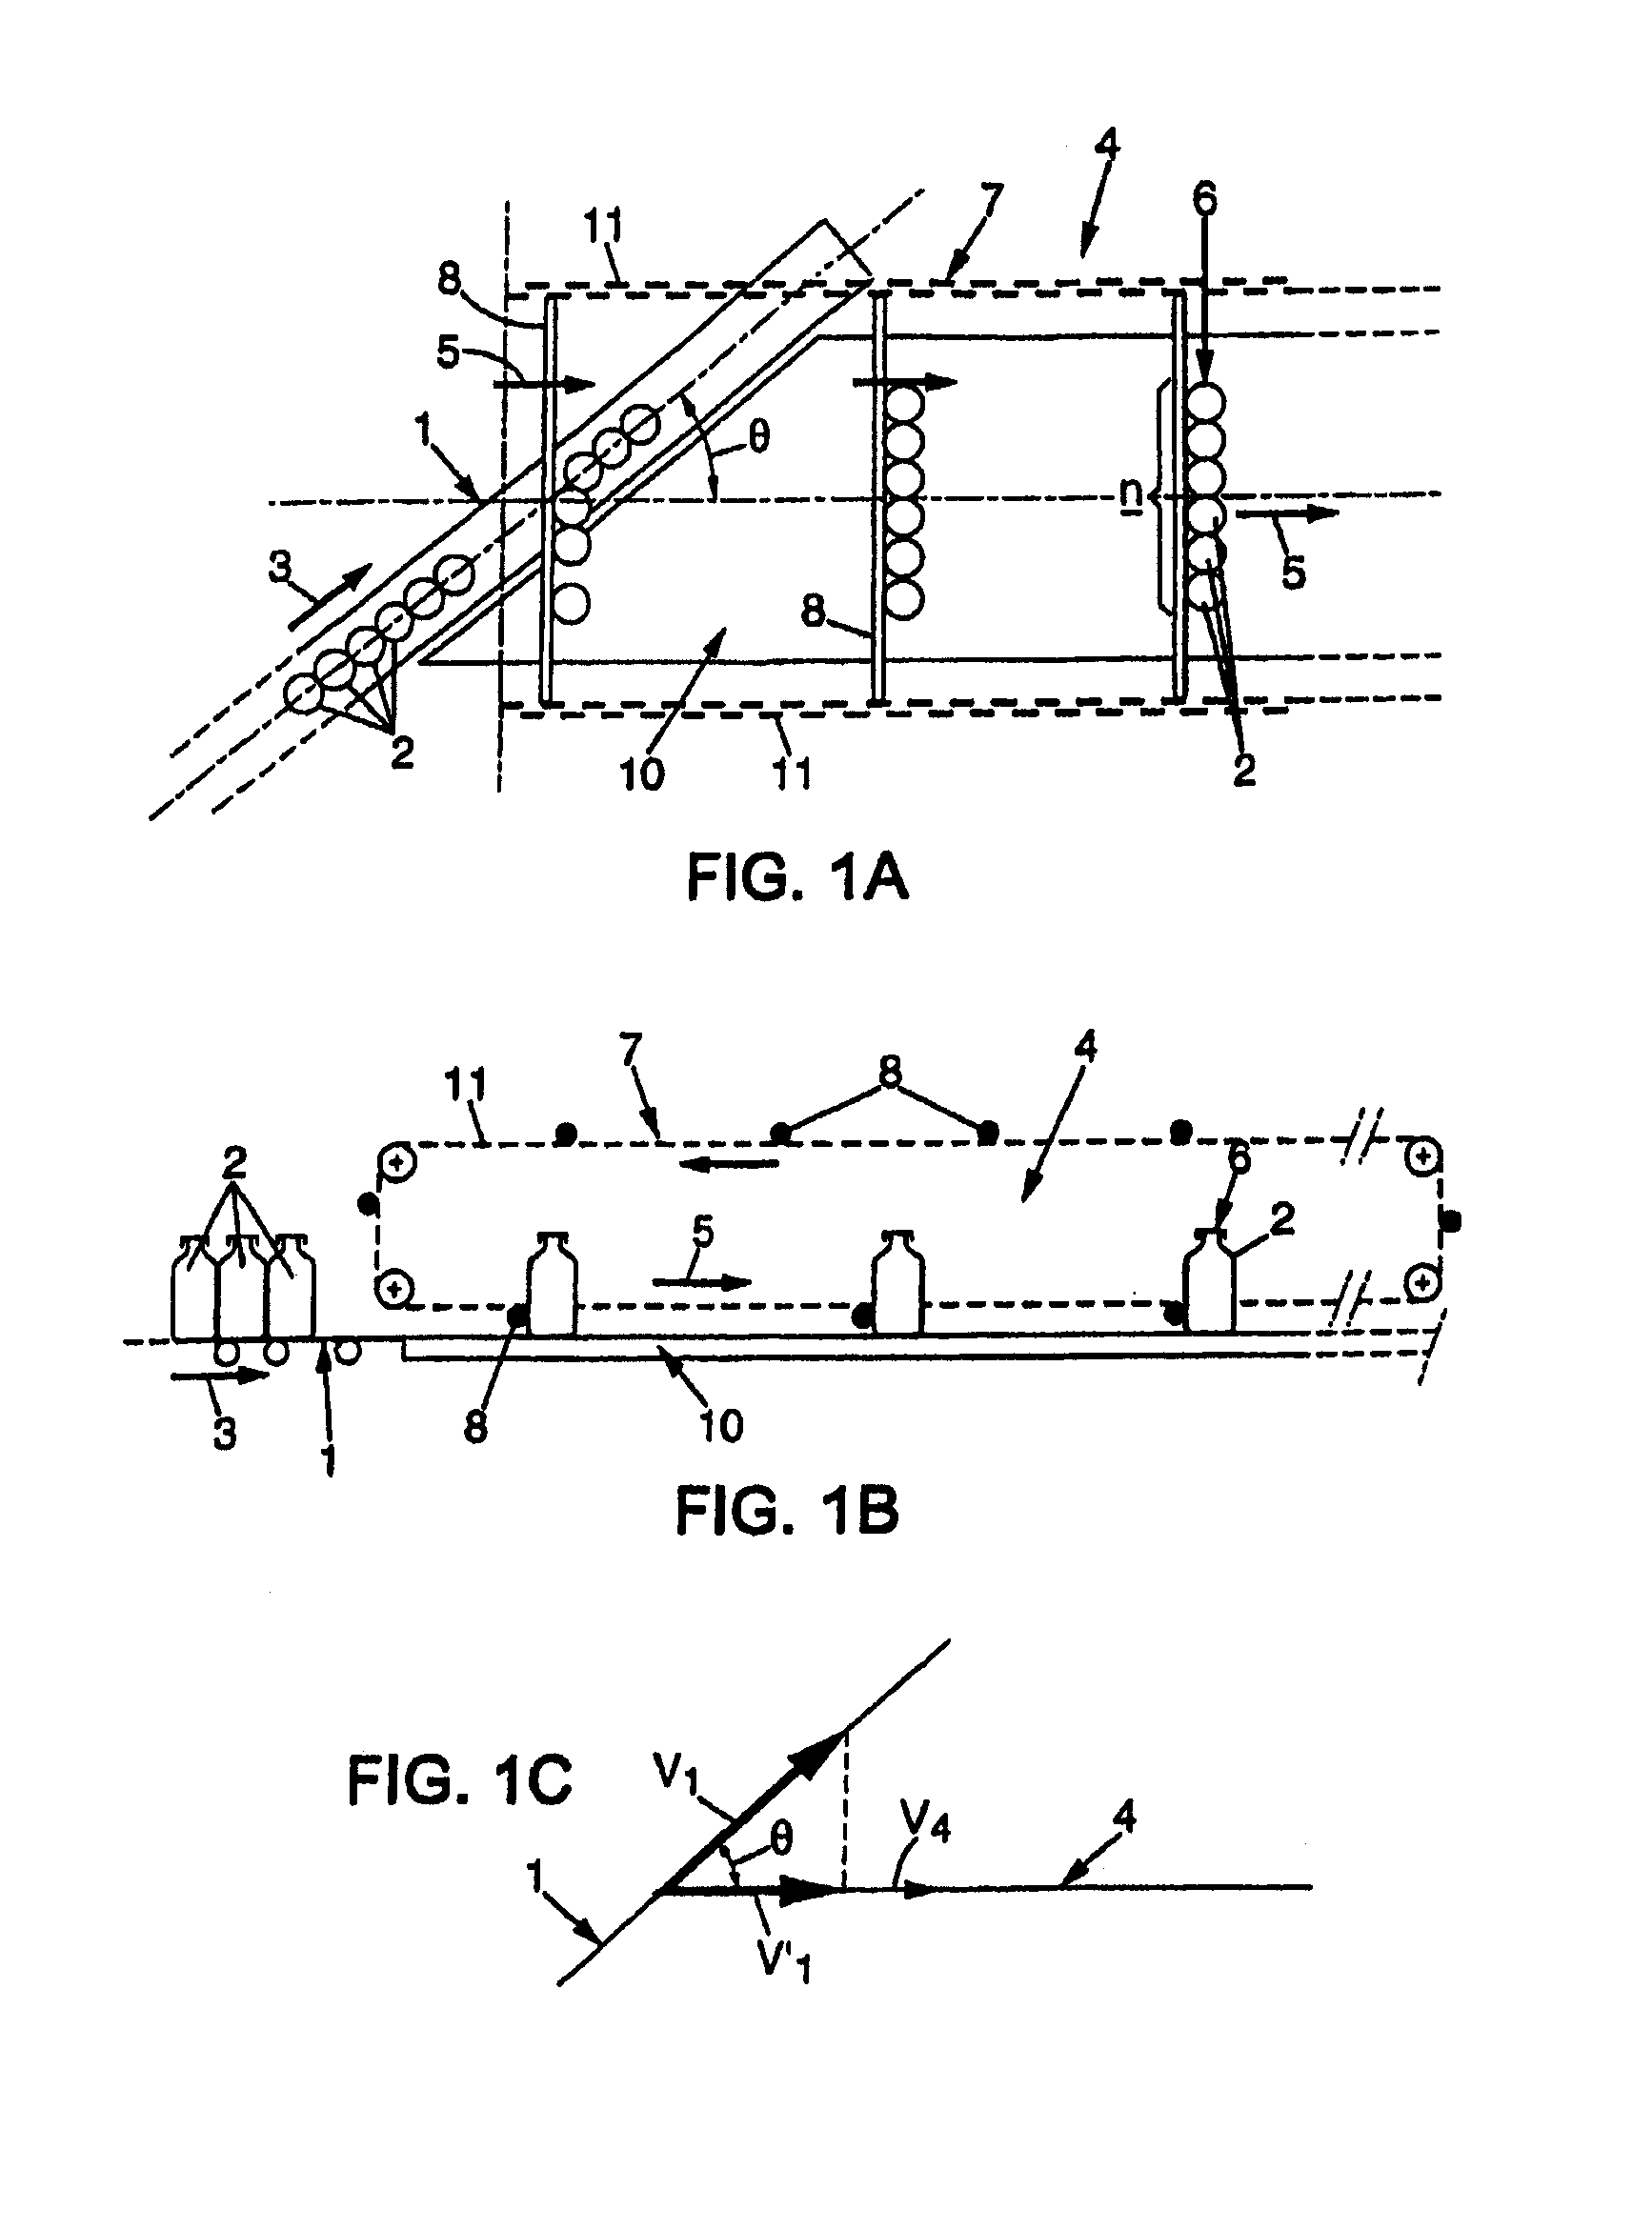 Machine for transferring objects aligned in rows